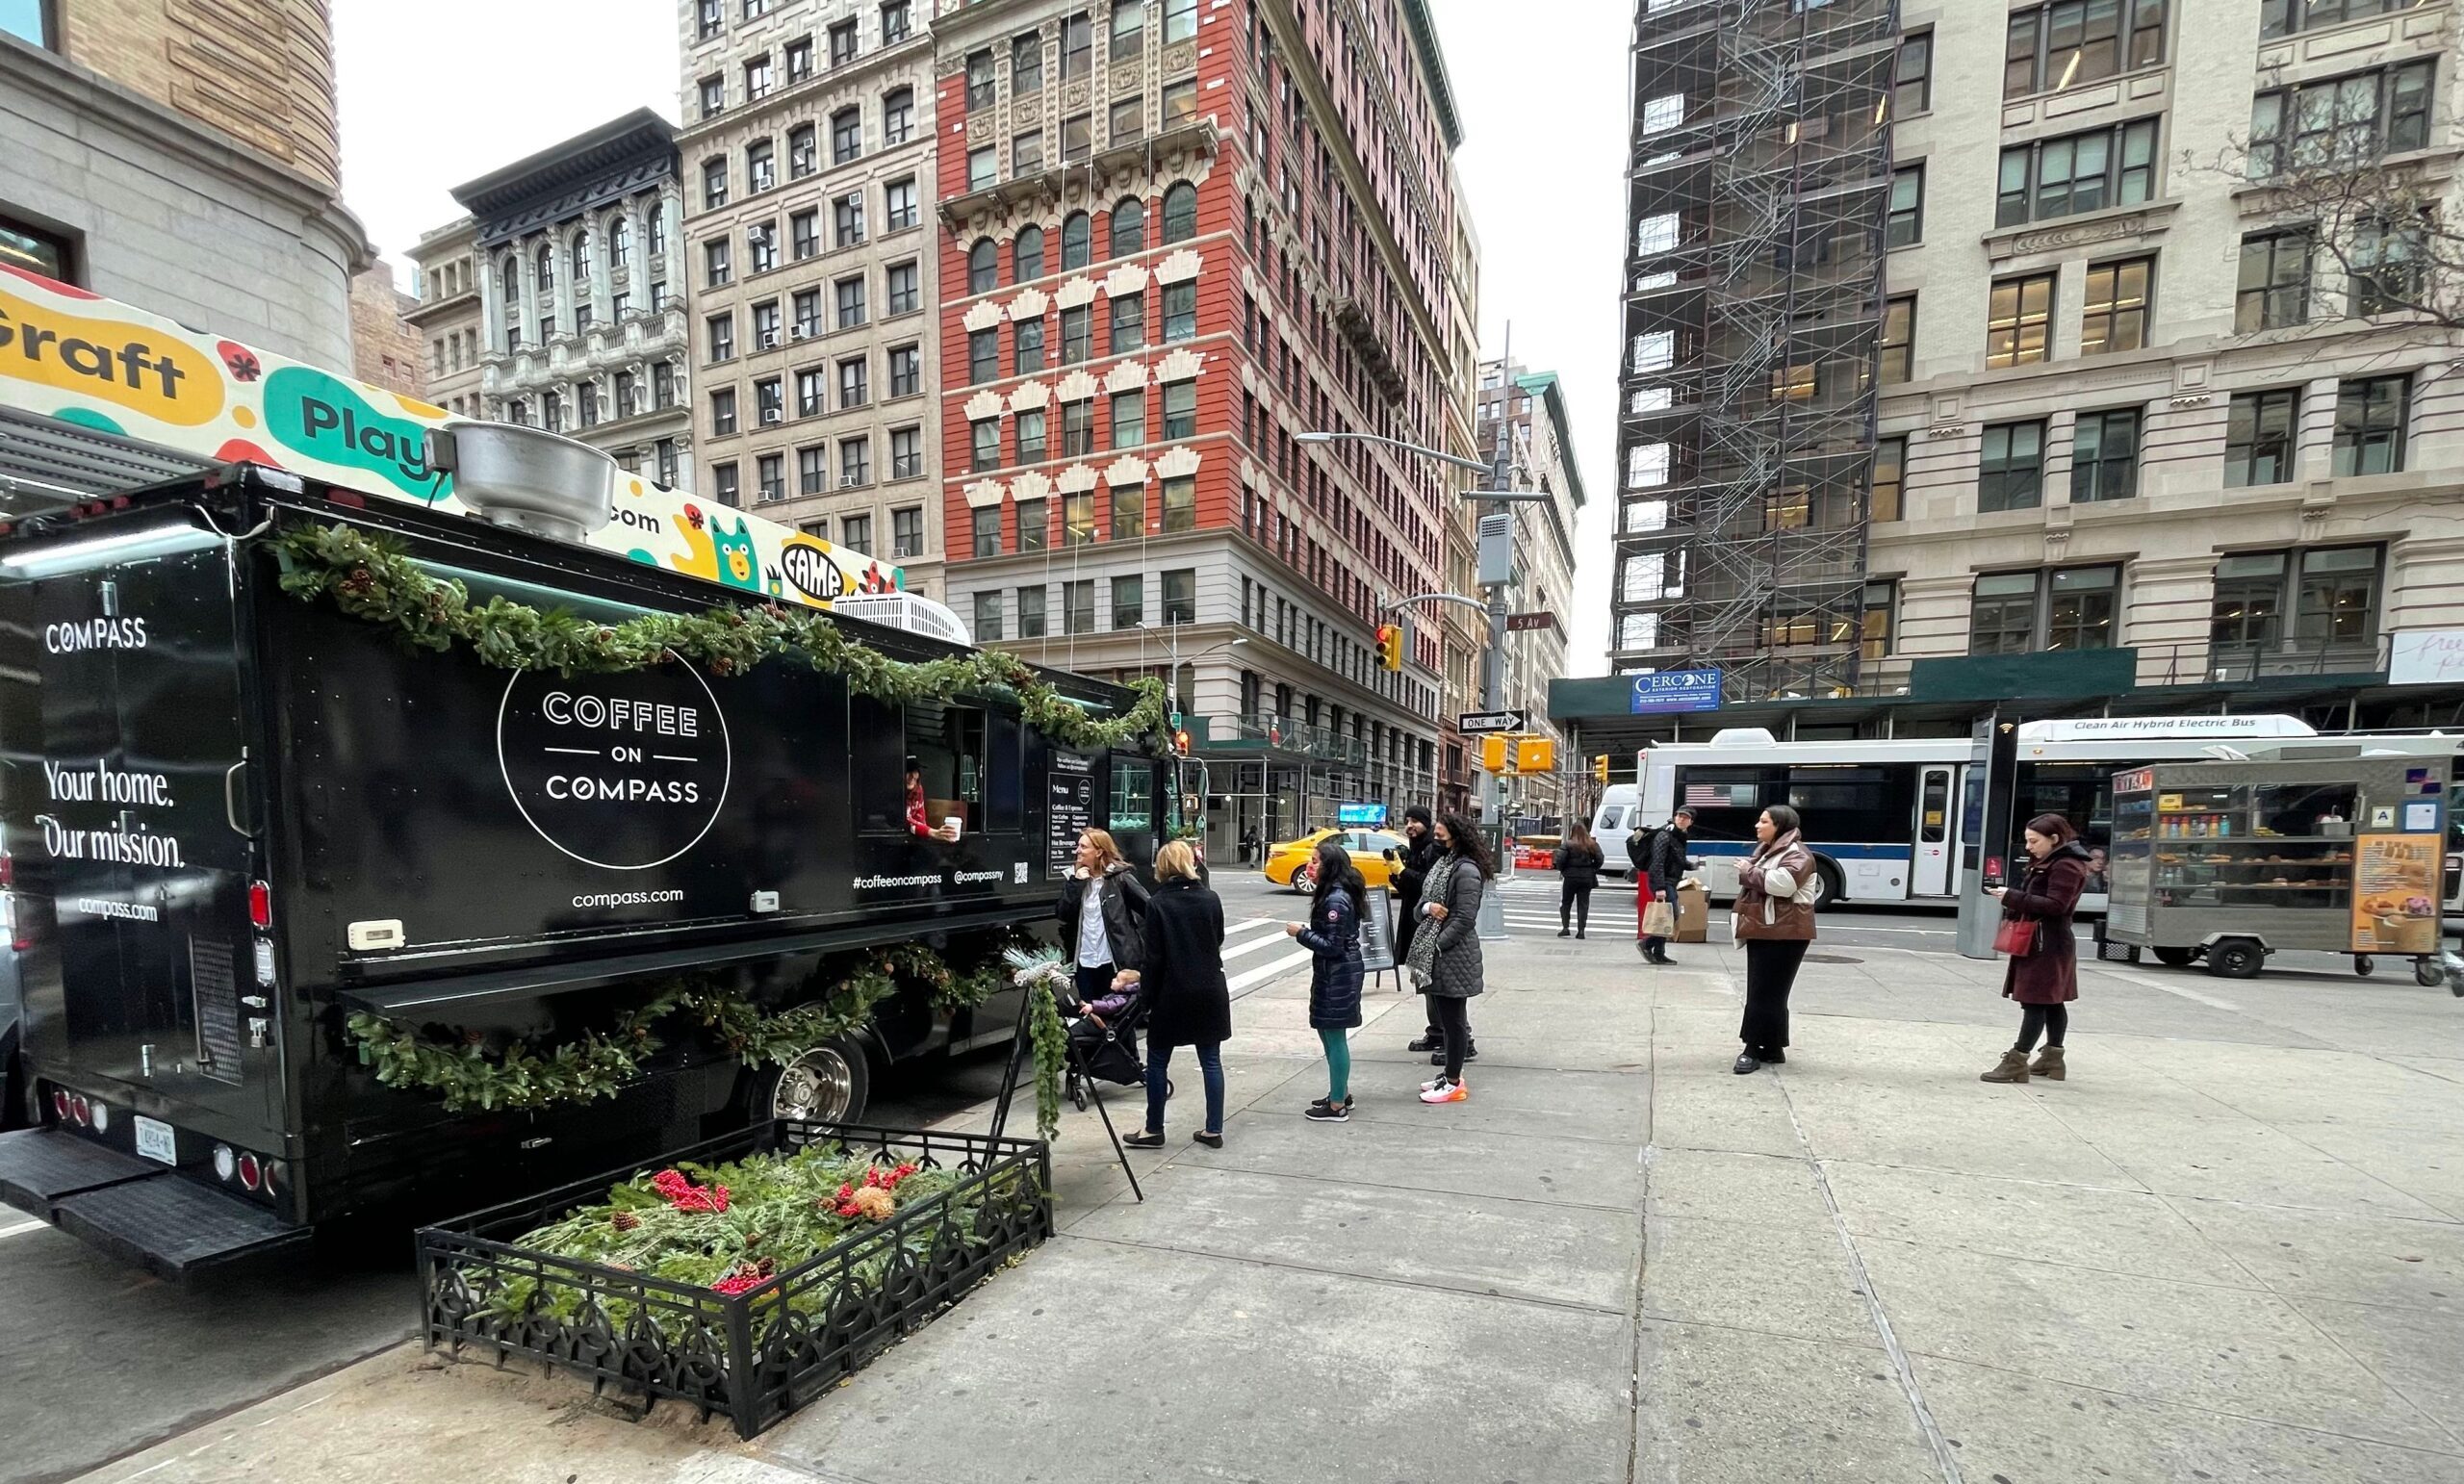 Compass handing out coffee in NYC